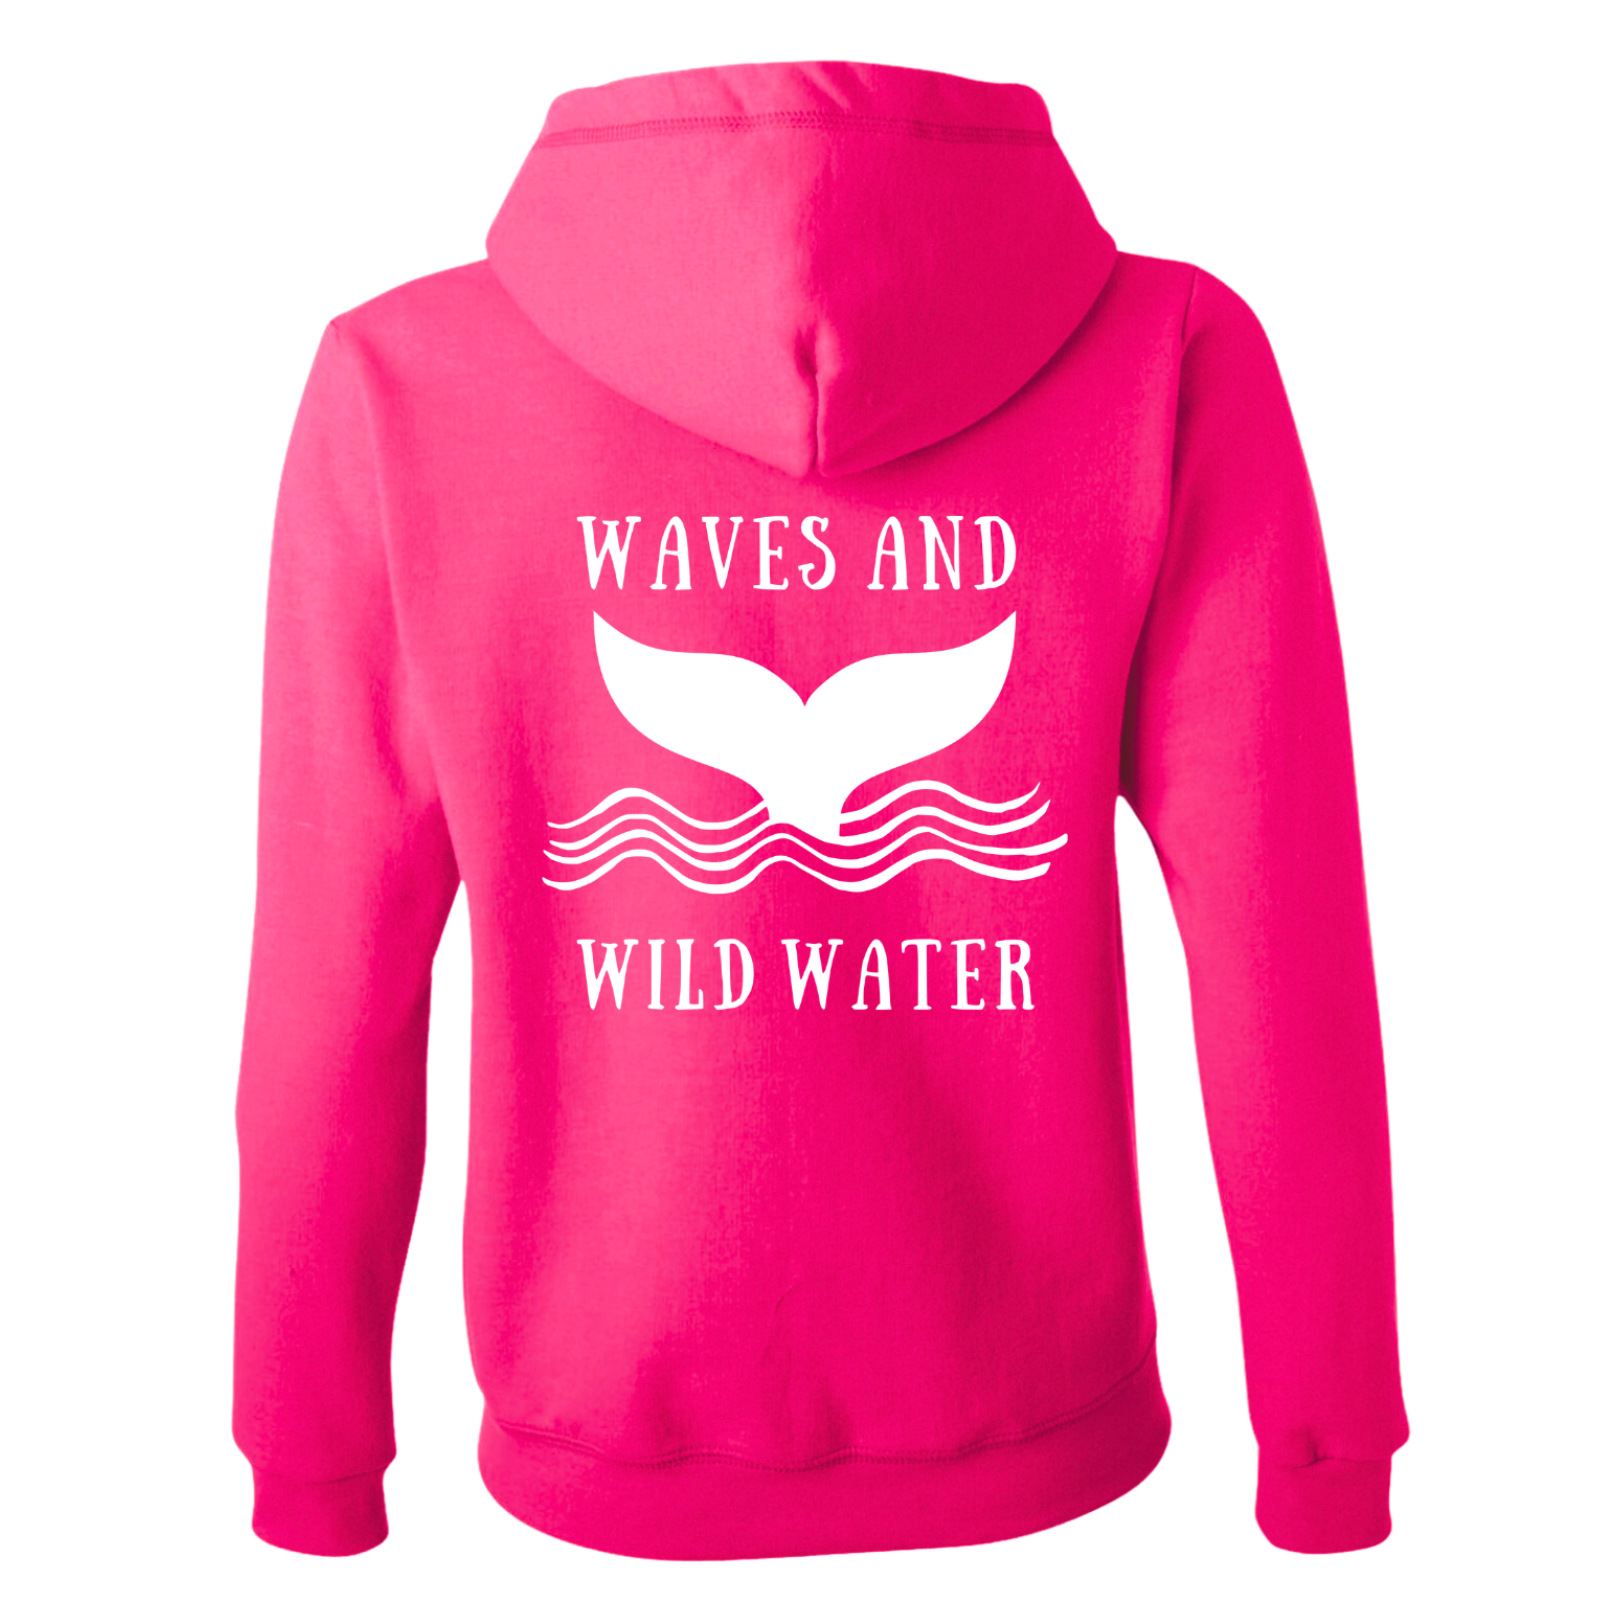 A bright pink hoodie with a white Waves & Wild Water logo, depicting a whale tail coming out of the water.